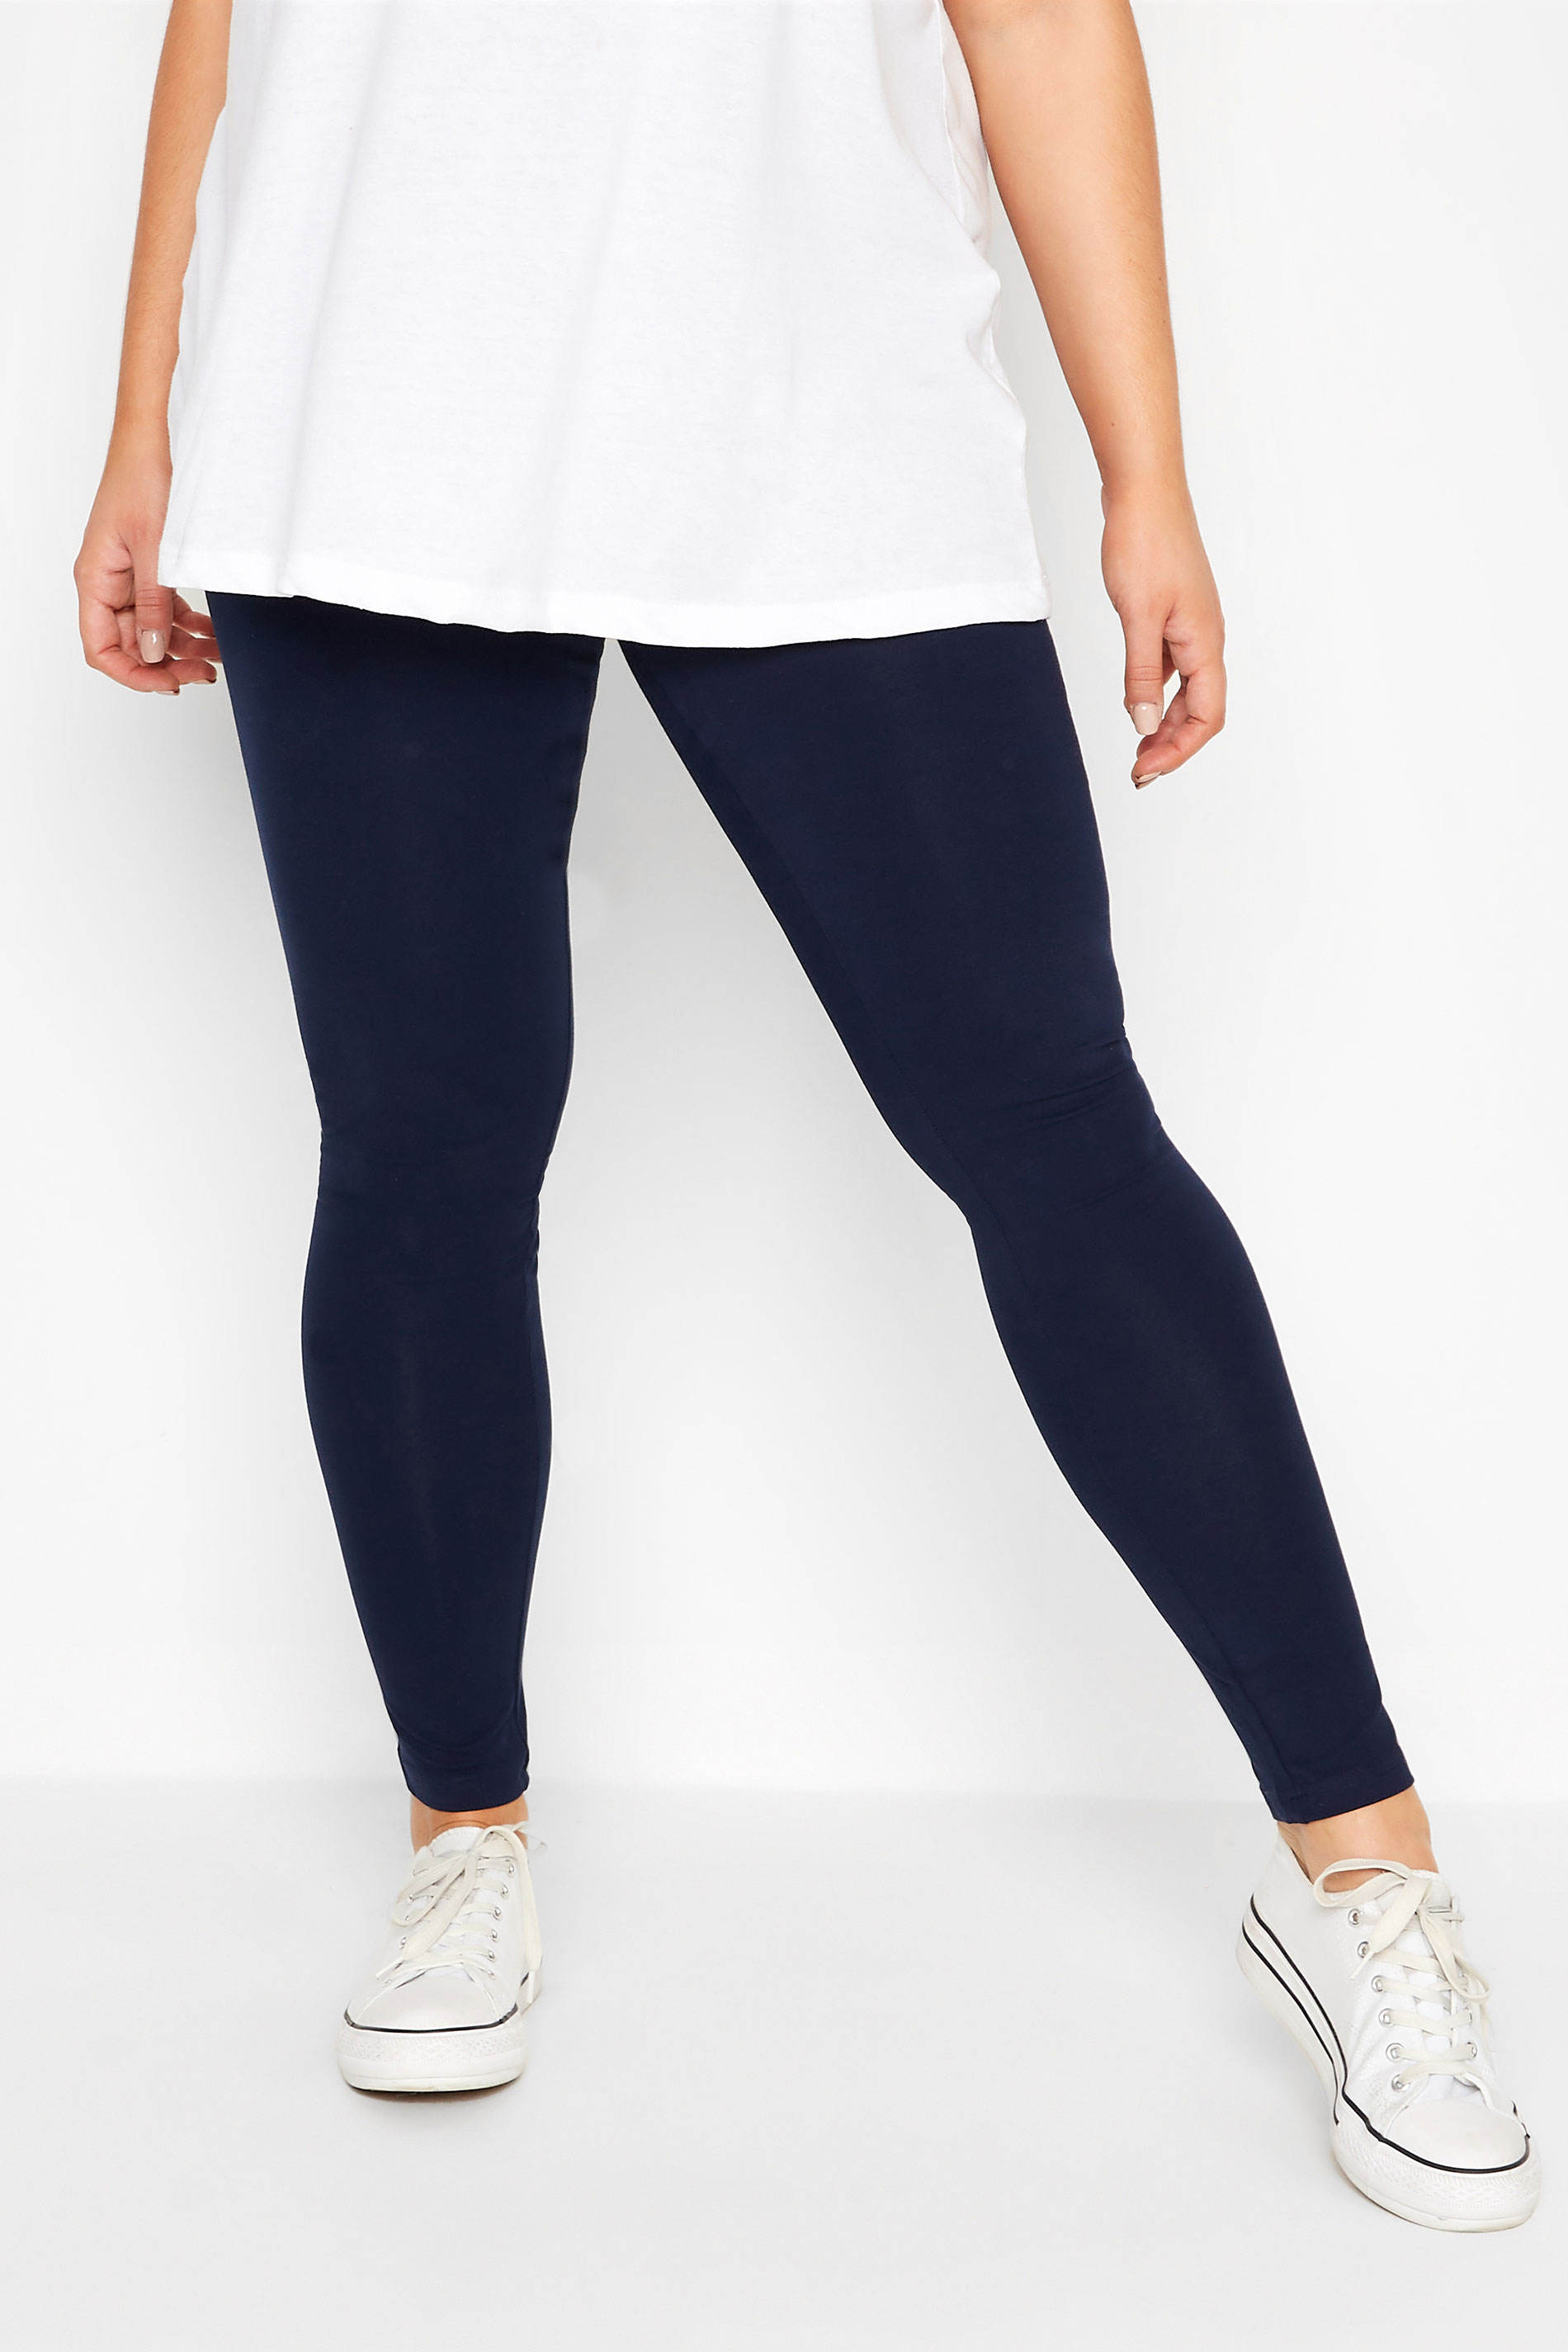 YOURS FOR GOOD Curve Navy Blue Cotton Essential Leggings_AR.jpg